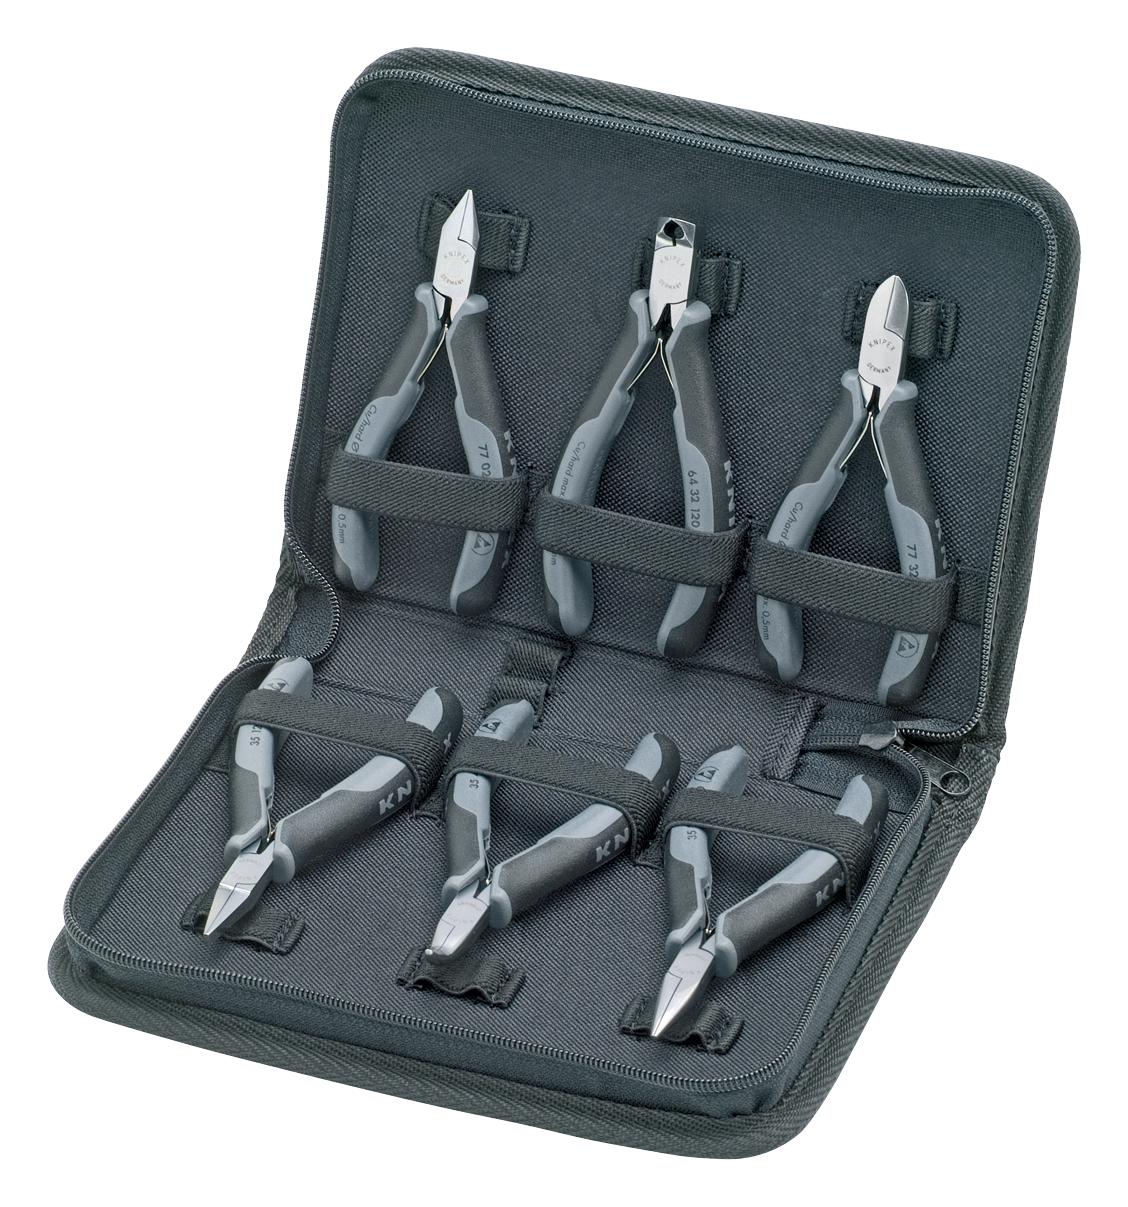 Knipex 00 20 17 Plier/cutter Set, Esd, 6Pc